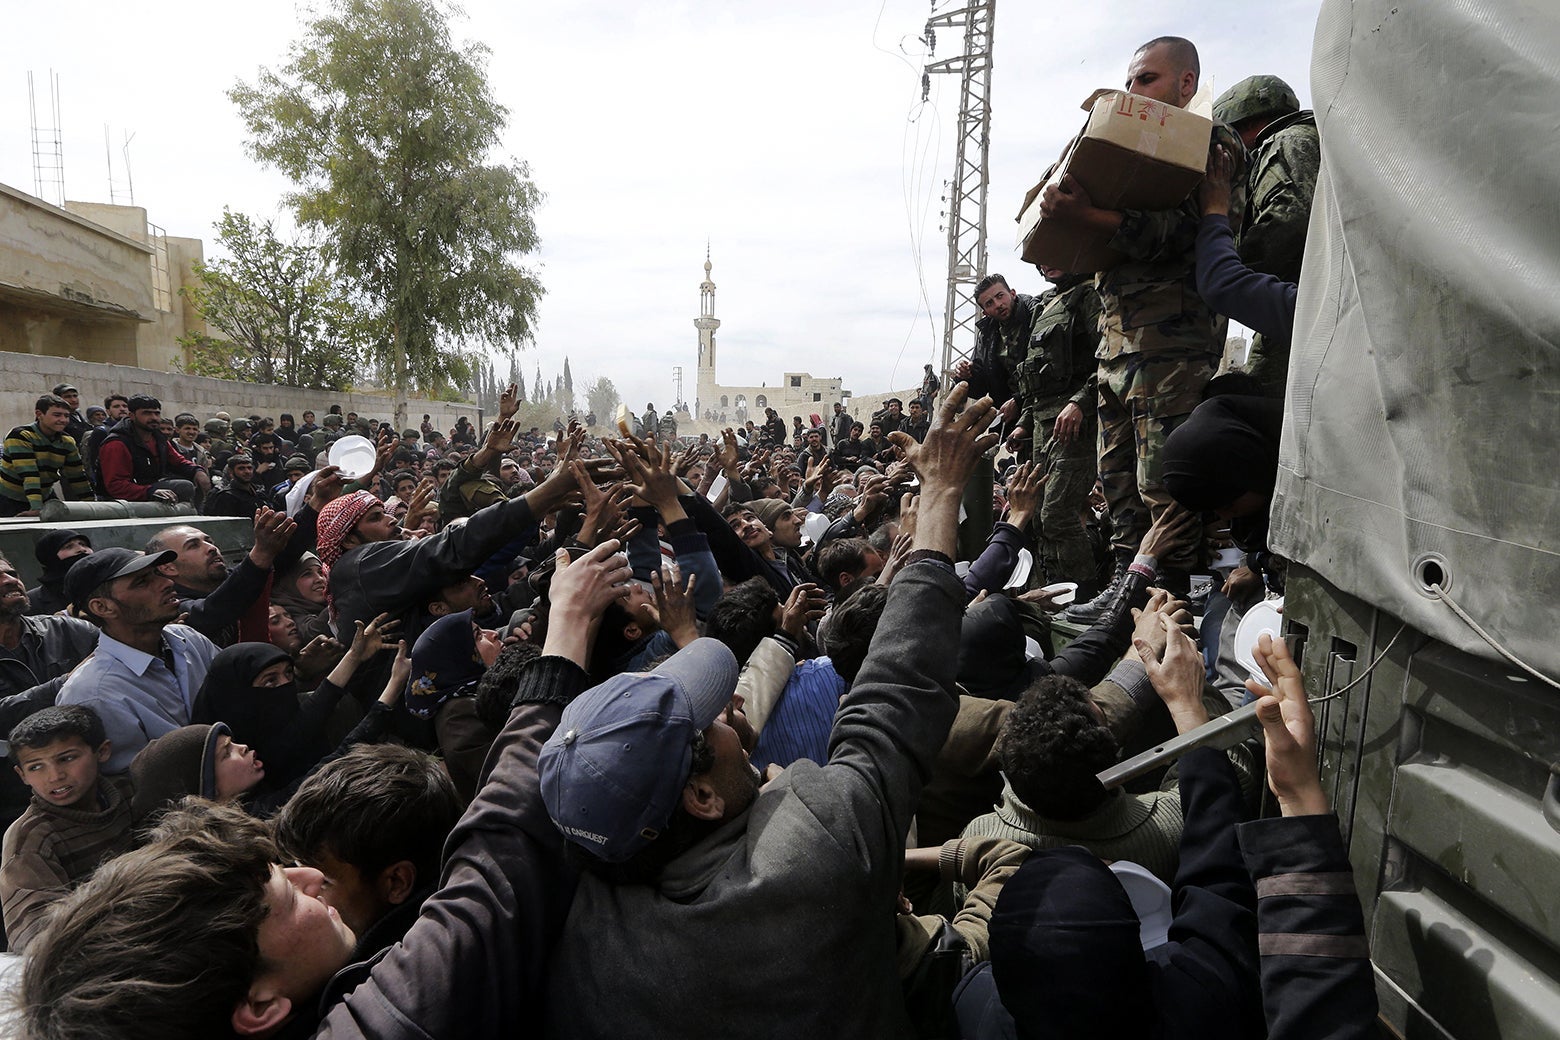 A crowd of Syrians stretching their arms up to soldiers holding boxes of food.